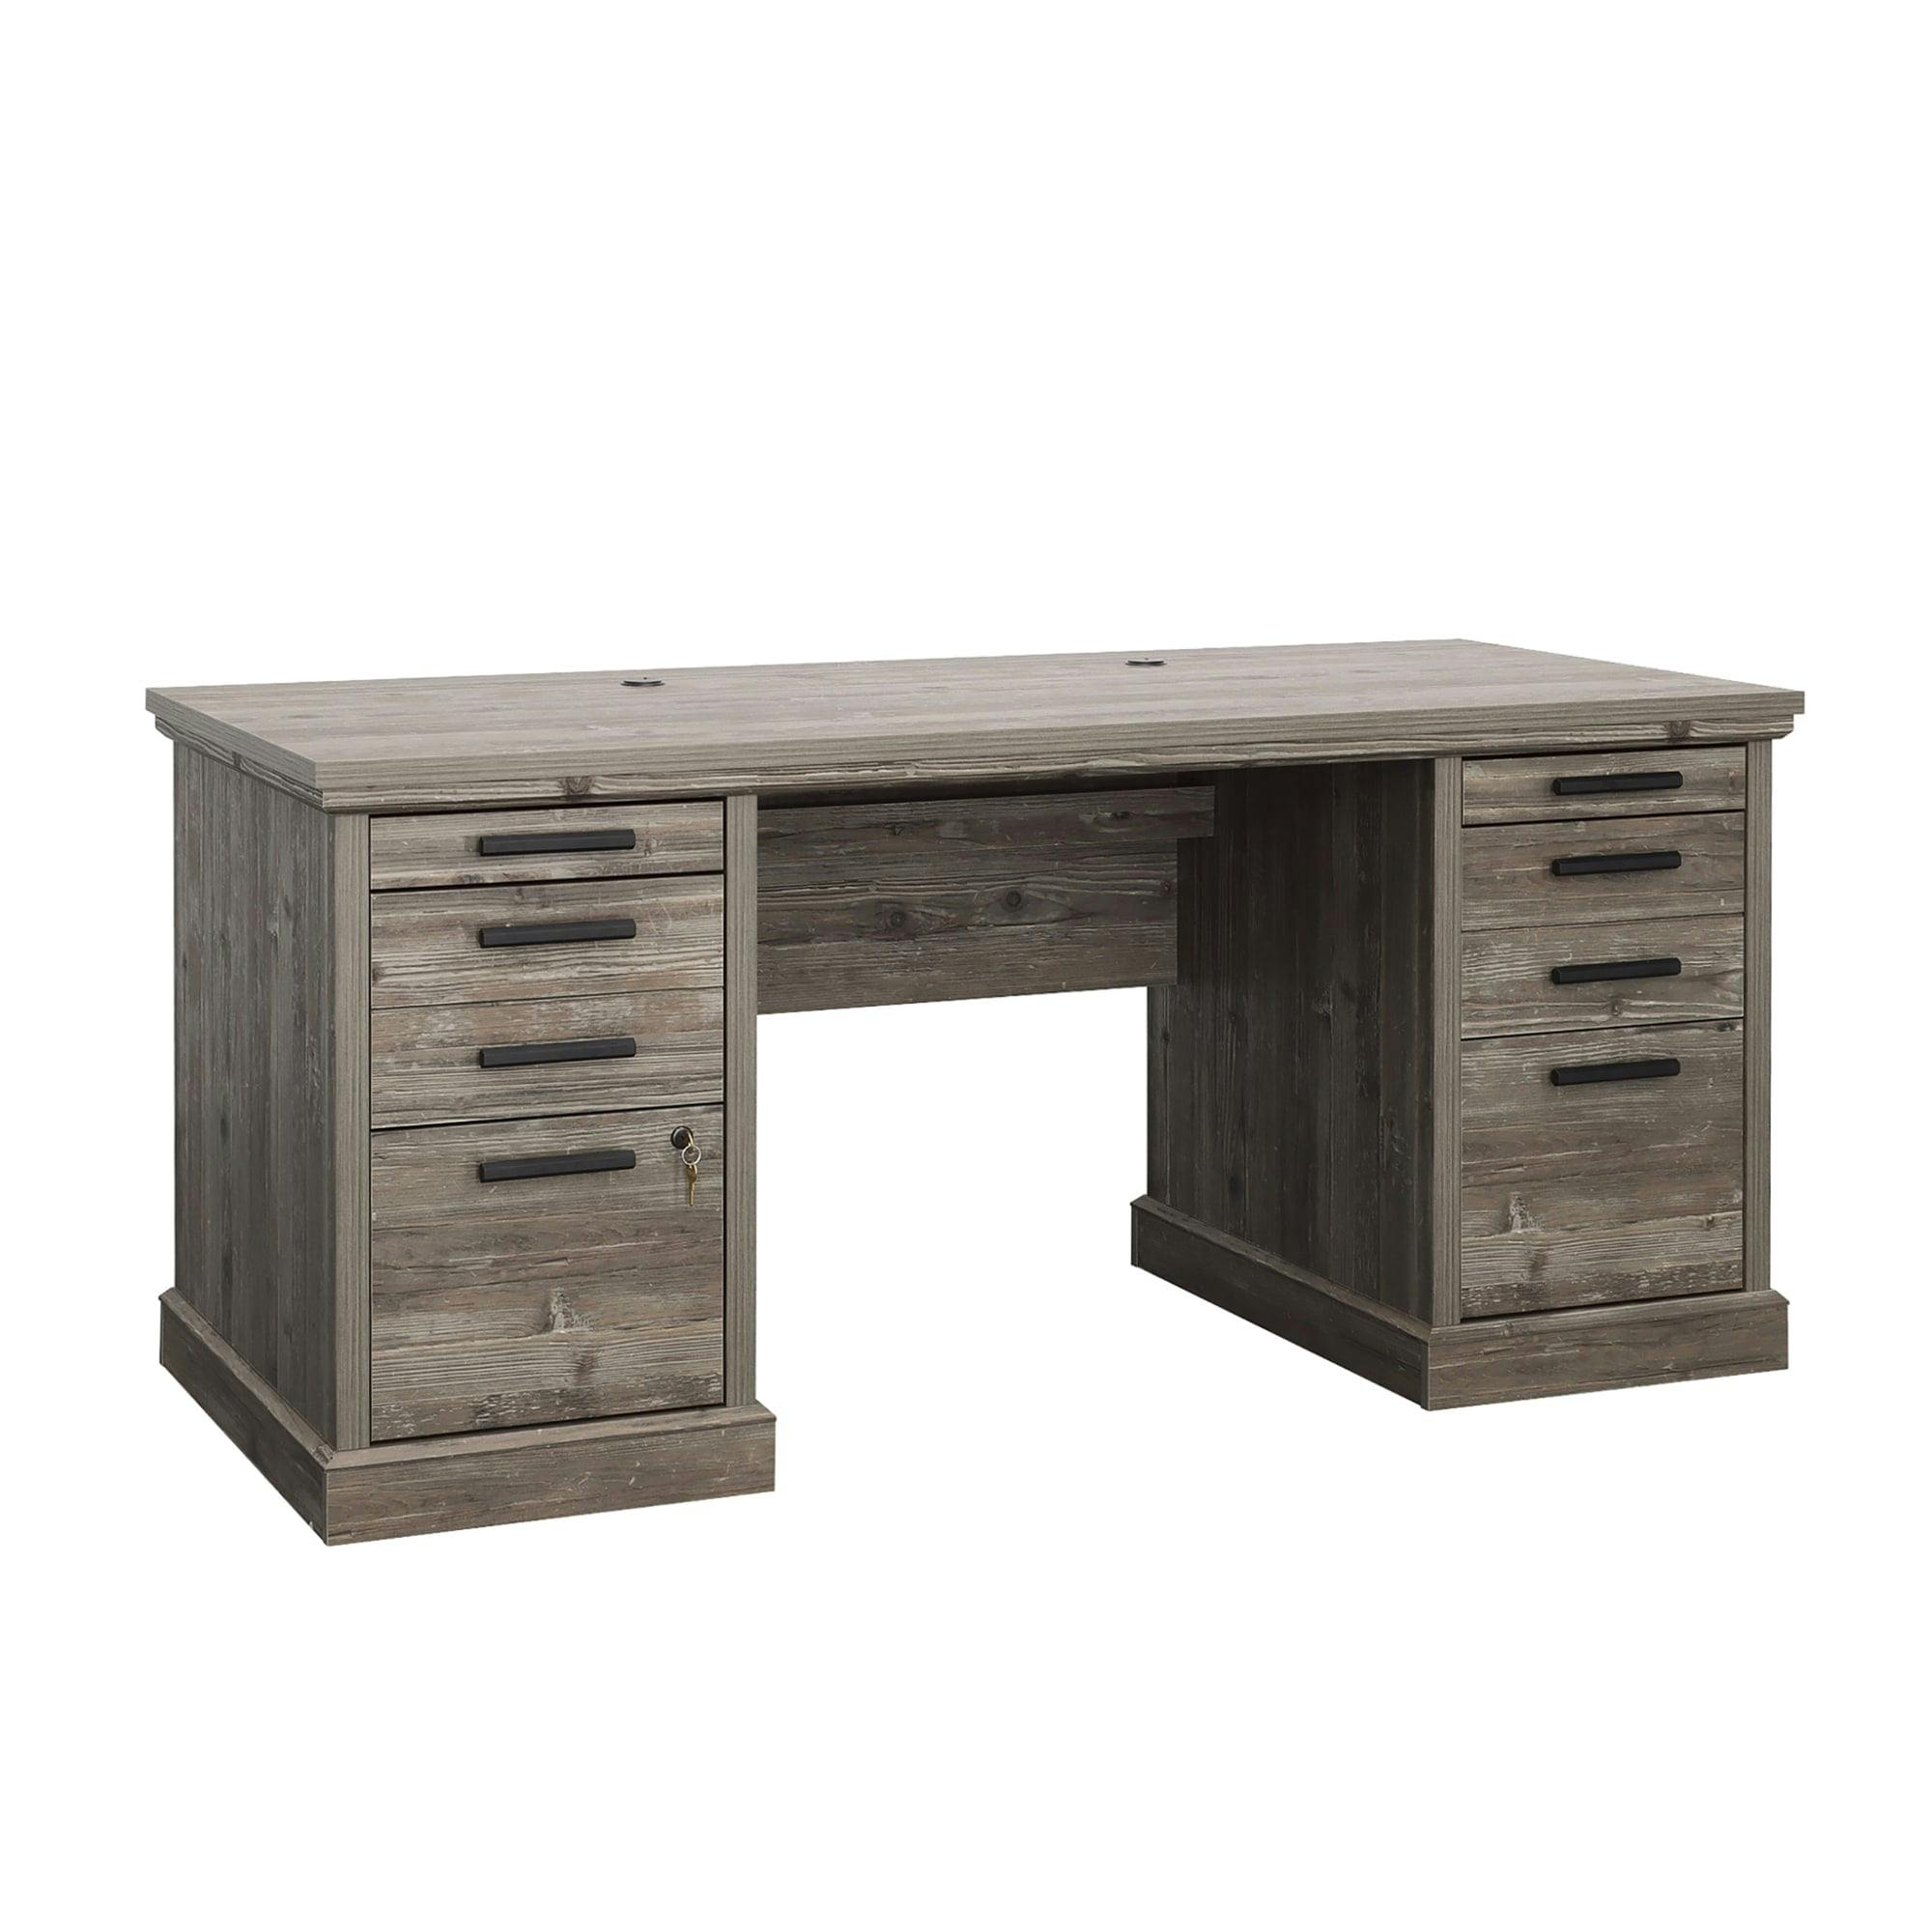 Aspen Post Pebble Pine Executive Desk with Dual Filing Cabinets